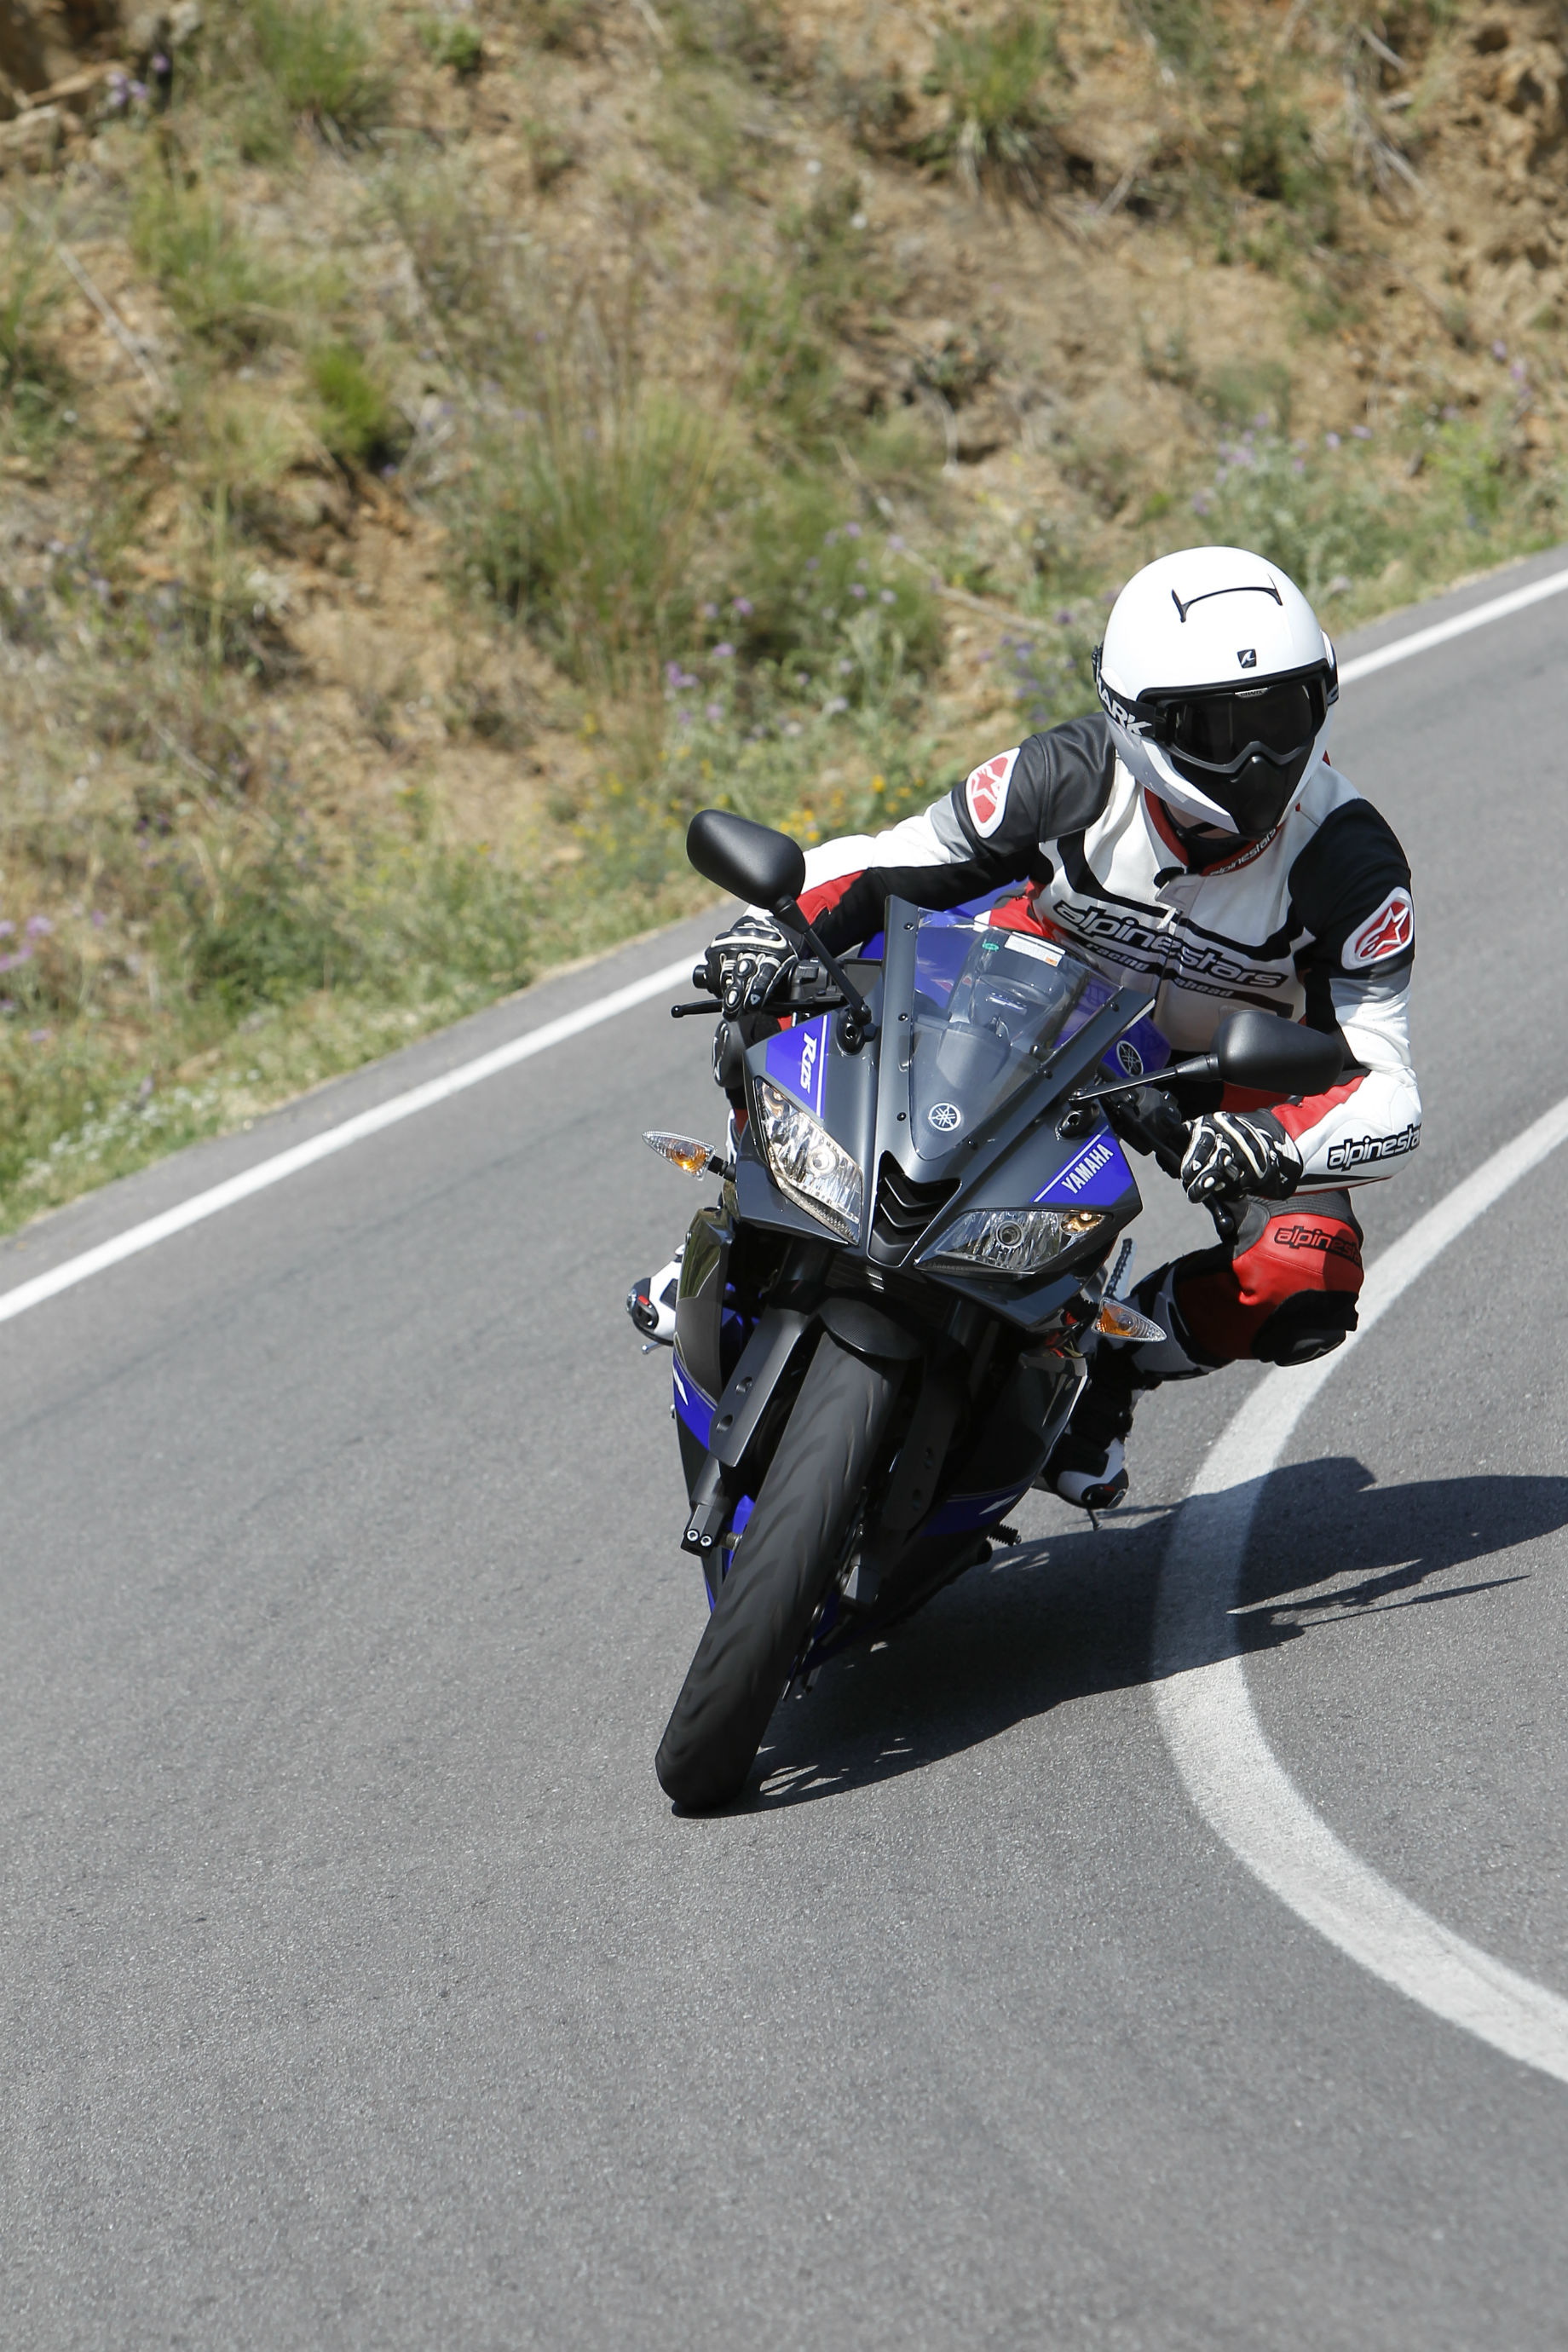 First ride: 2014 Yamaha YZF-R125 review